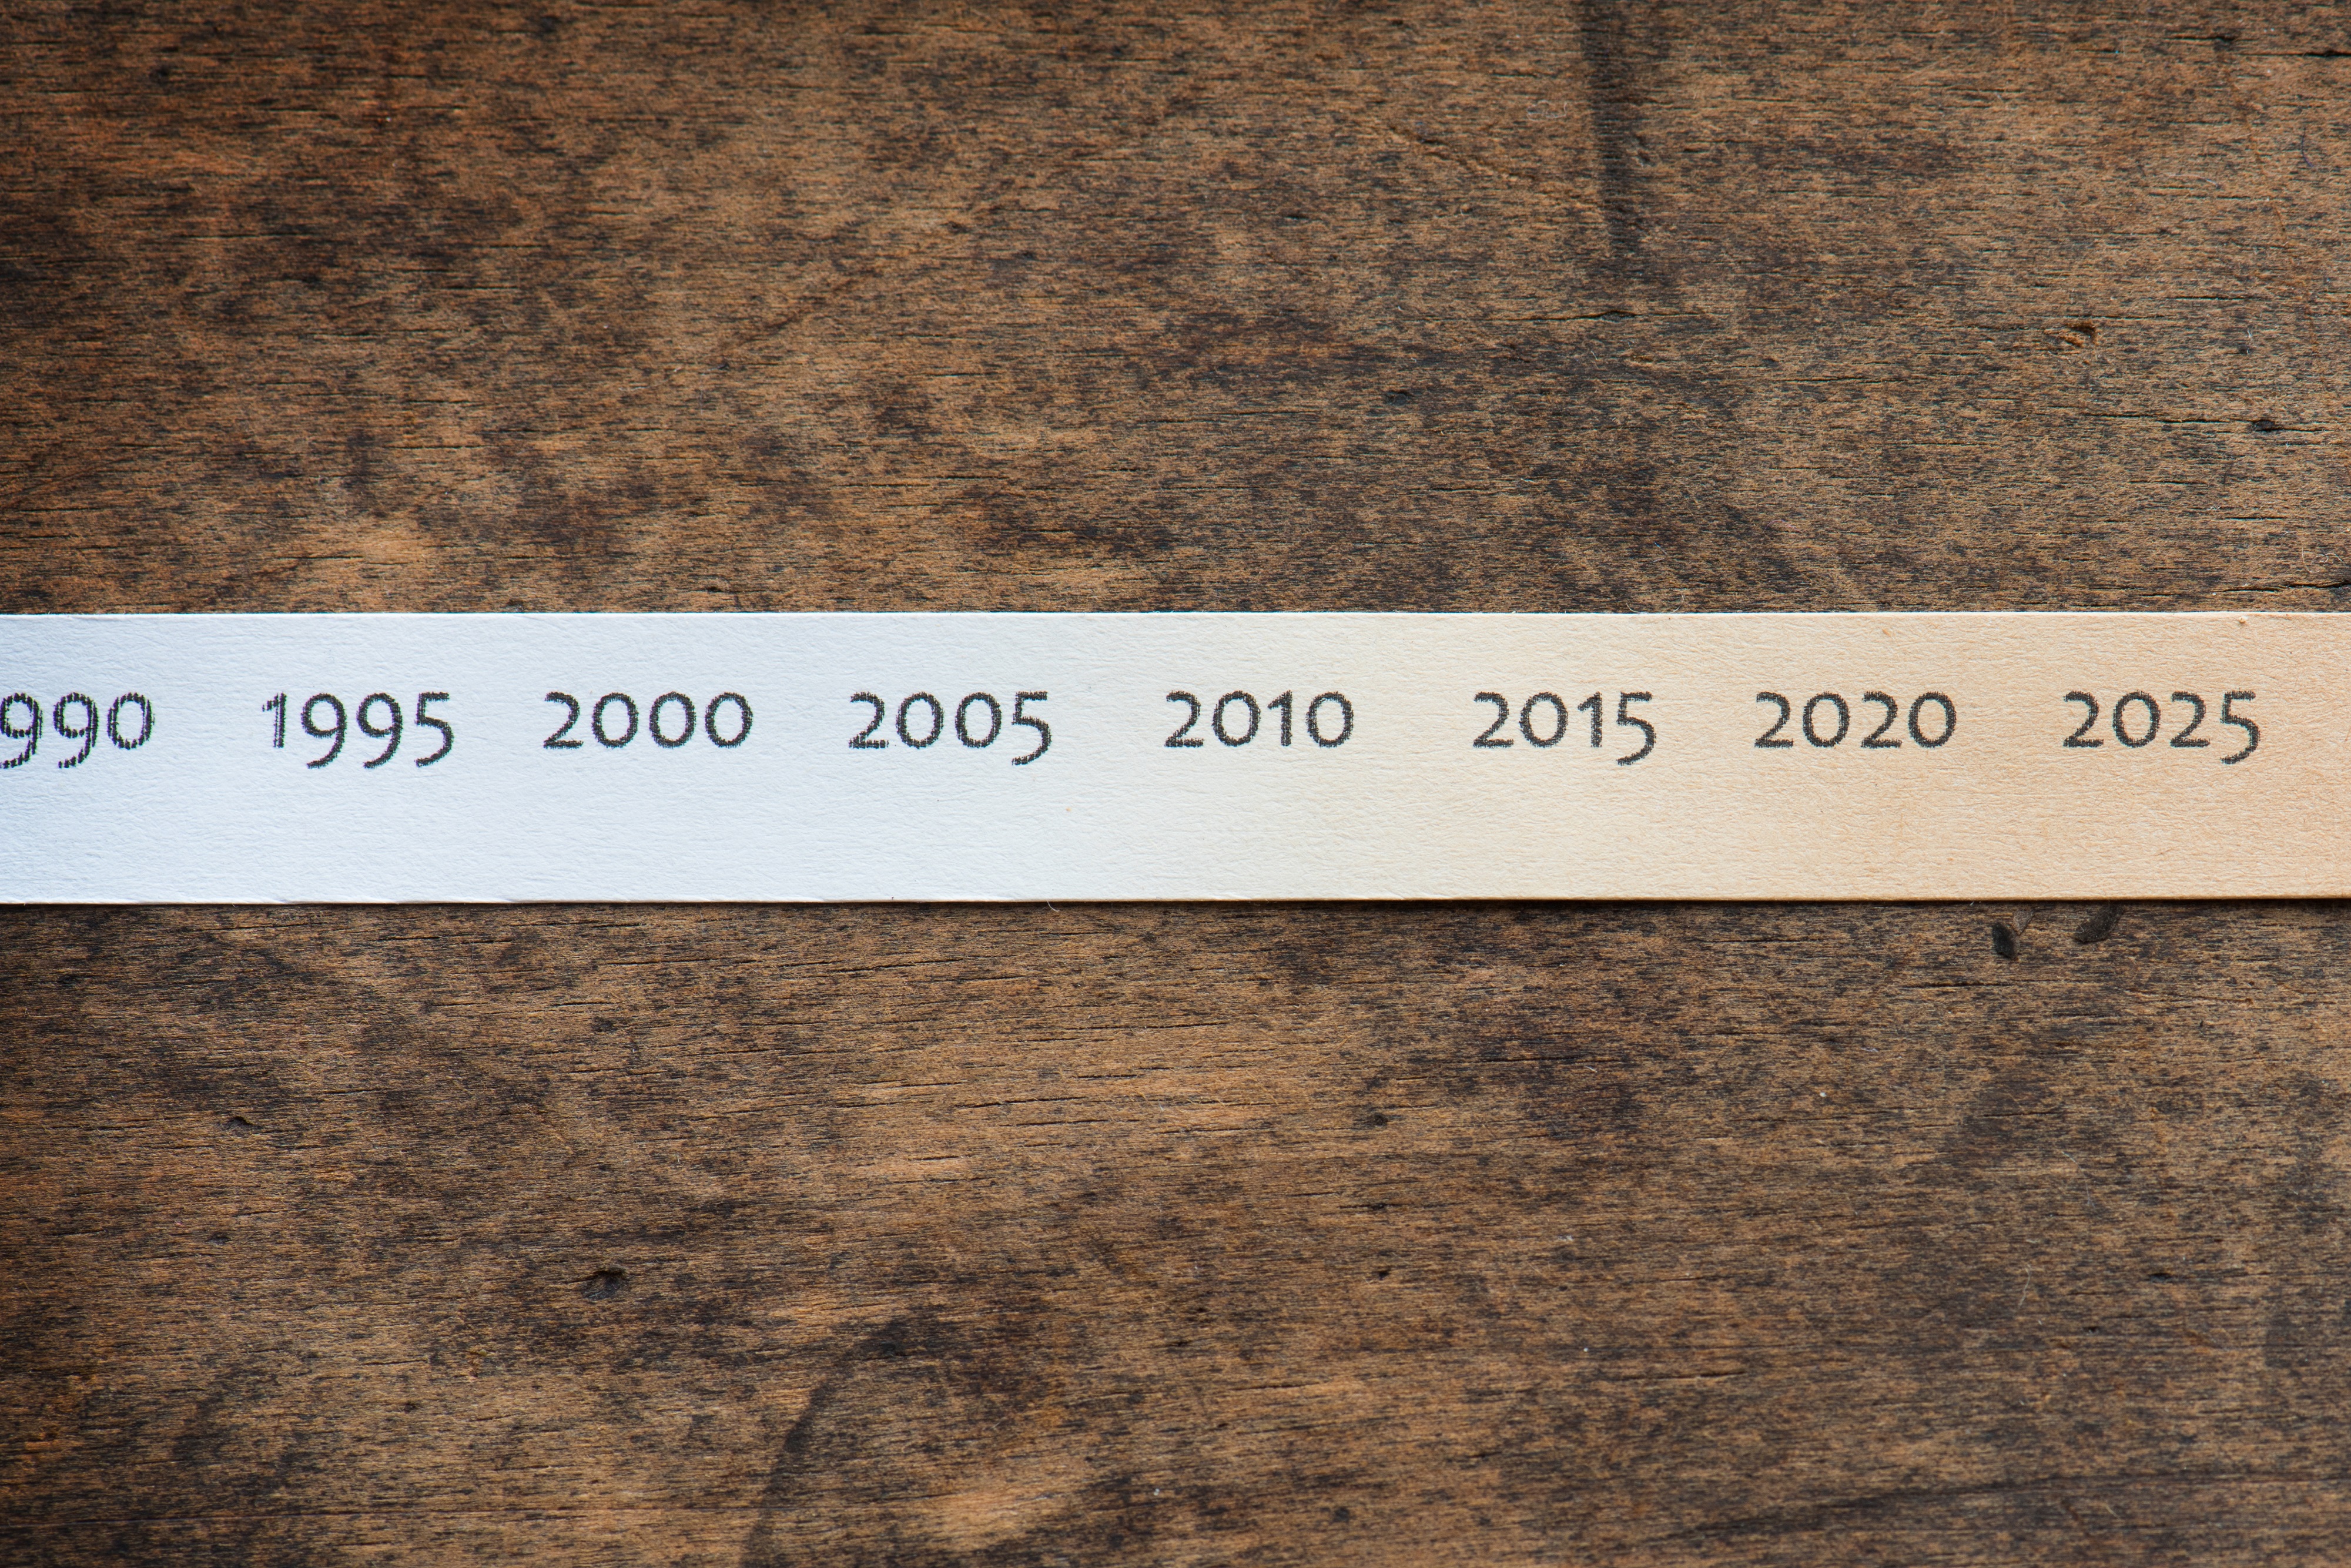 a thin strip labeled from 1990 to 2025